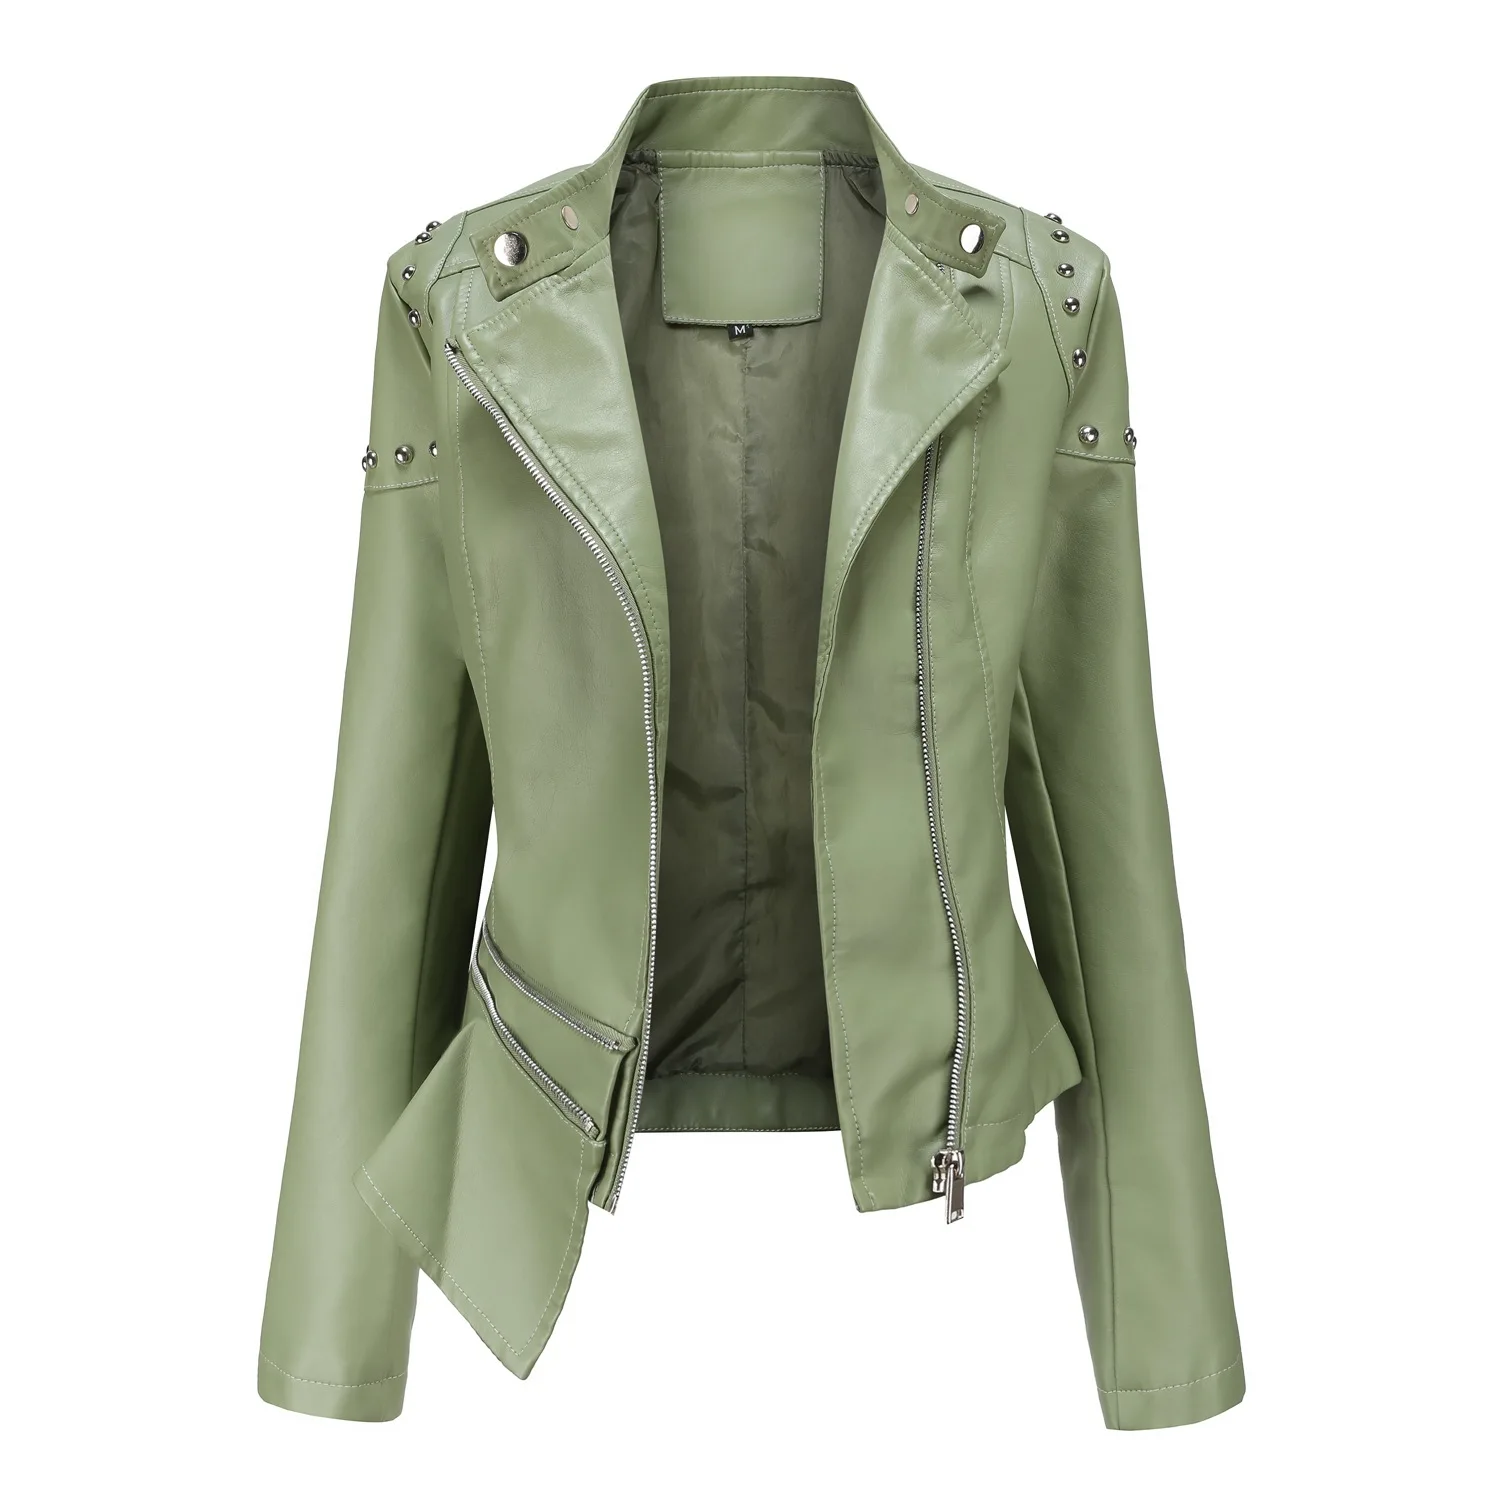 2022 New Rivets Fashion Standing Collar Leather Jacket Female Solid Color Jacket Female Spring and Autumn Jacket Women's Irregul enlarge